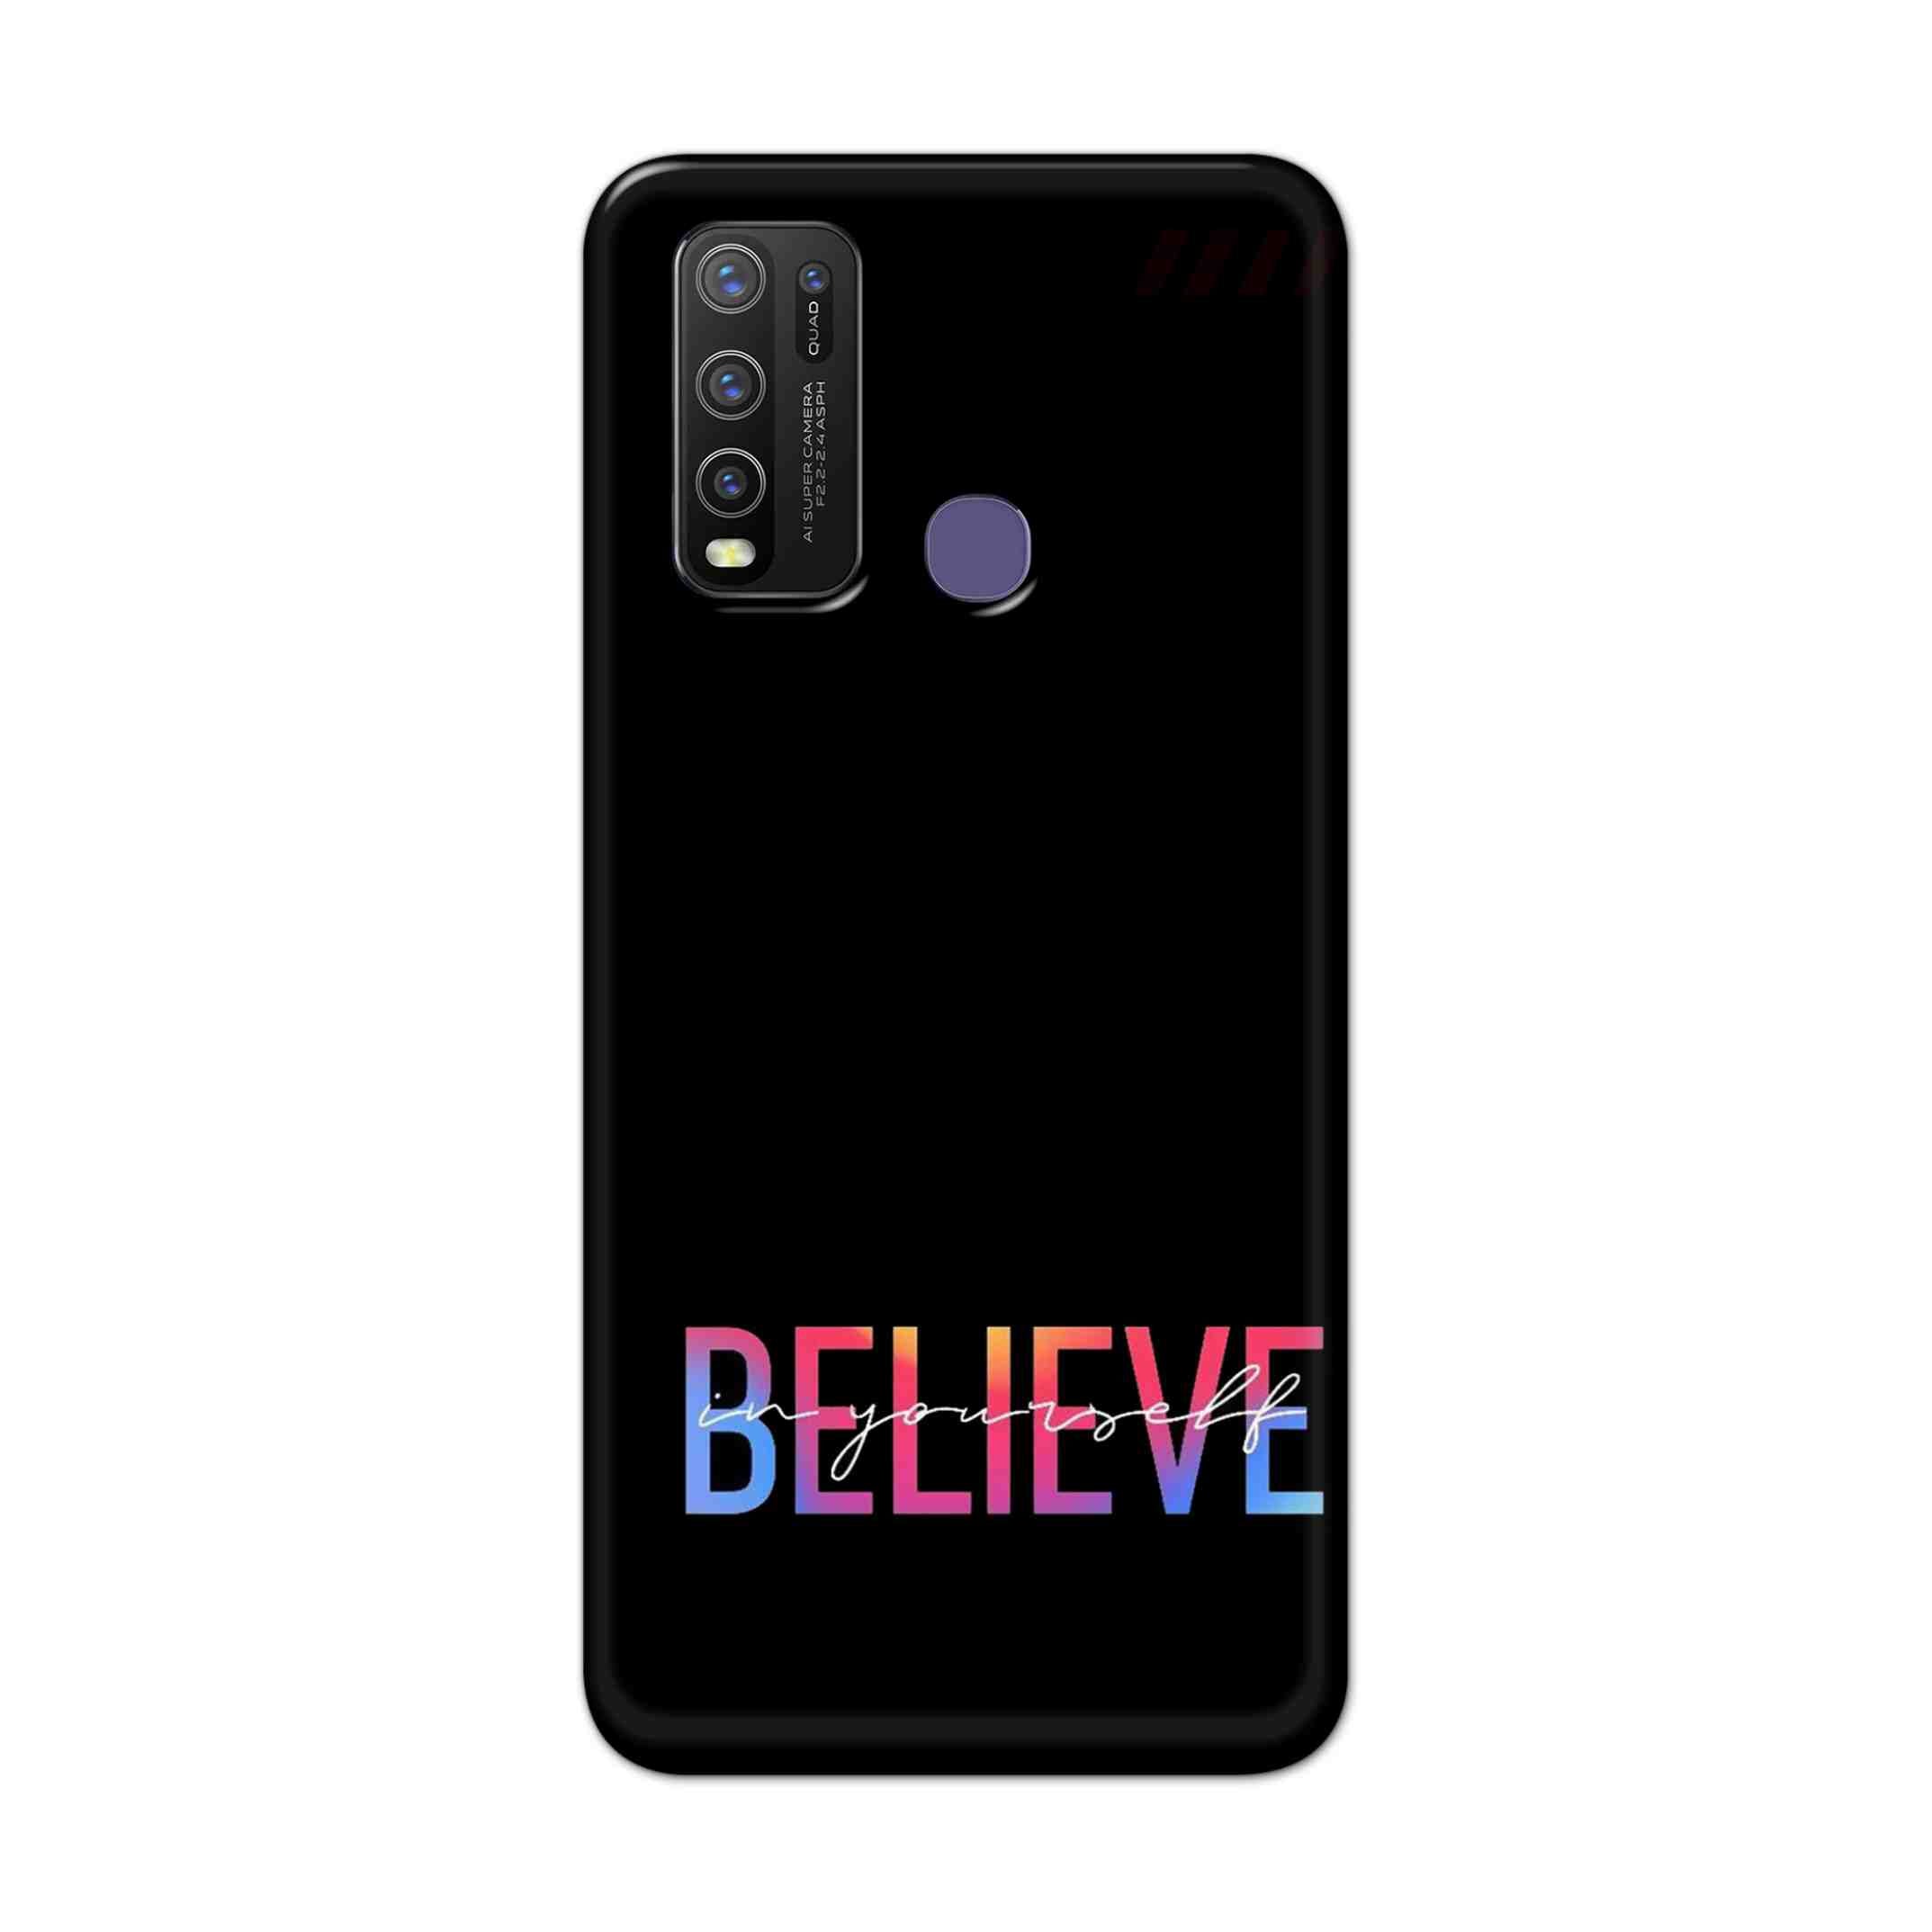 Buy Believe Hard Back Mobile Phone Case Cover For Vivo Y50 Online